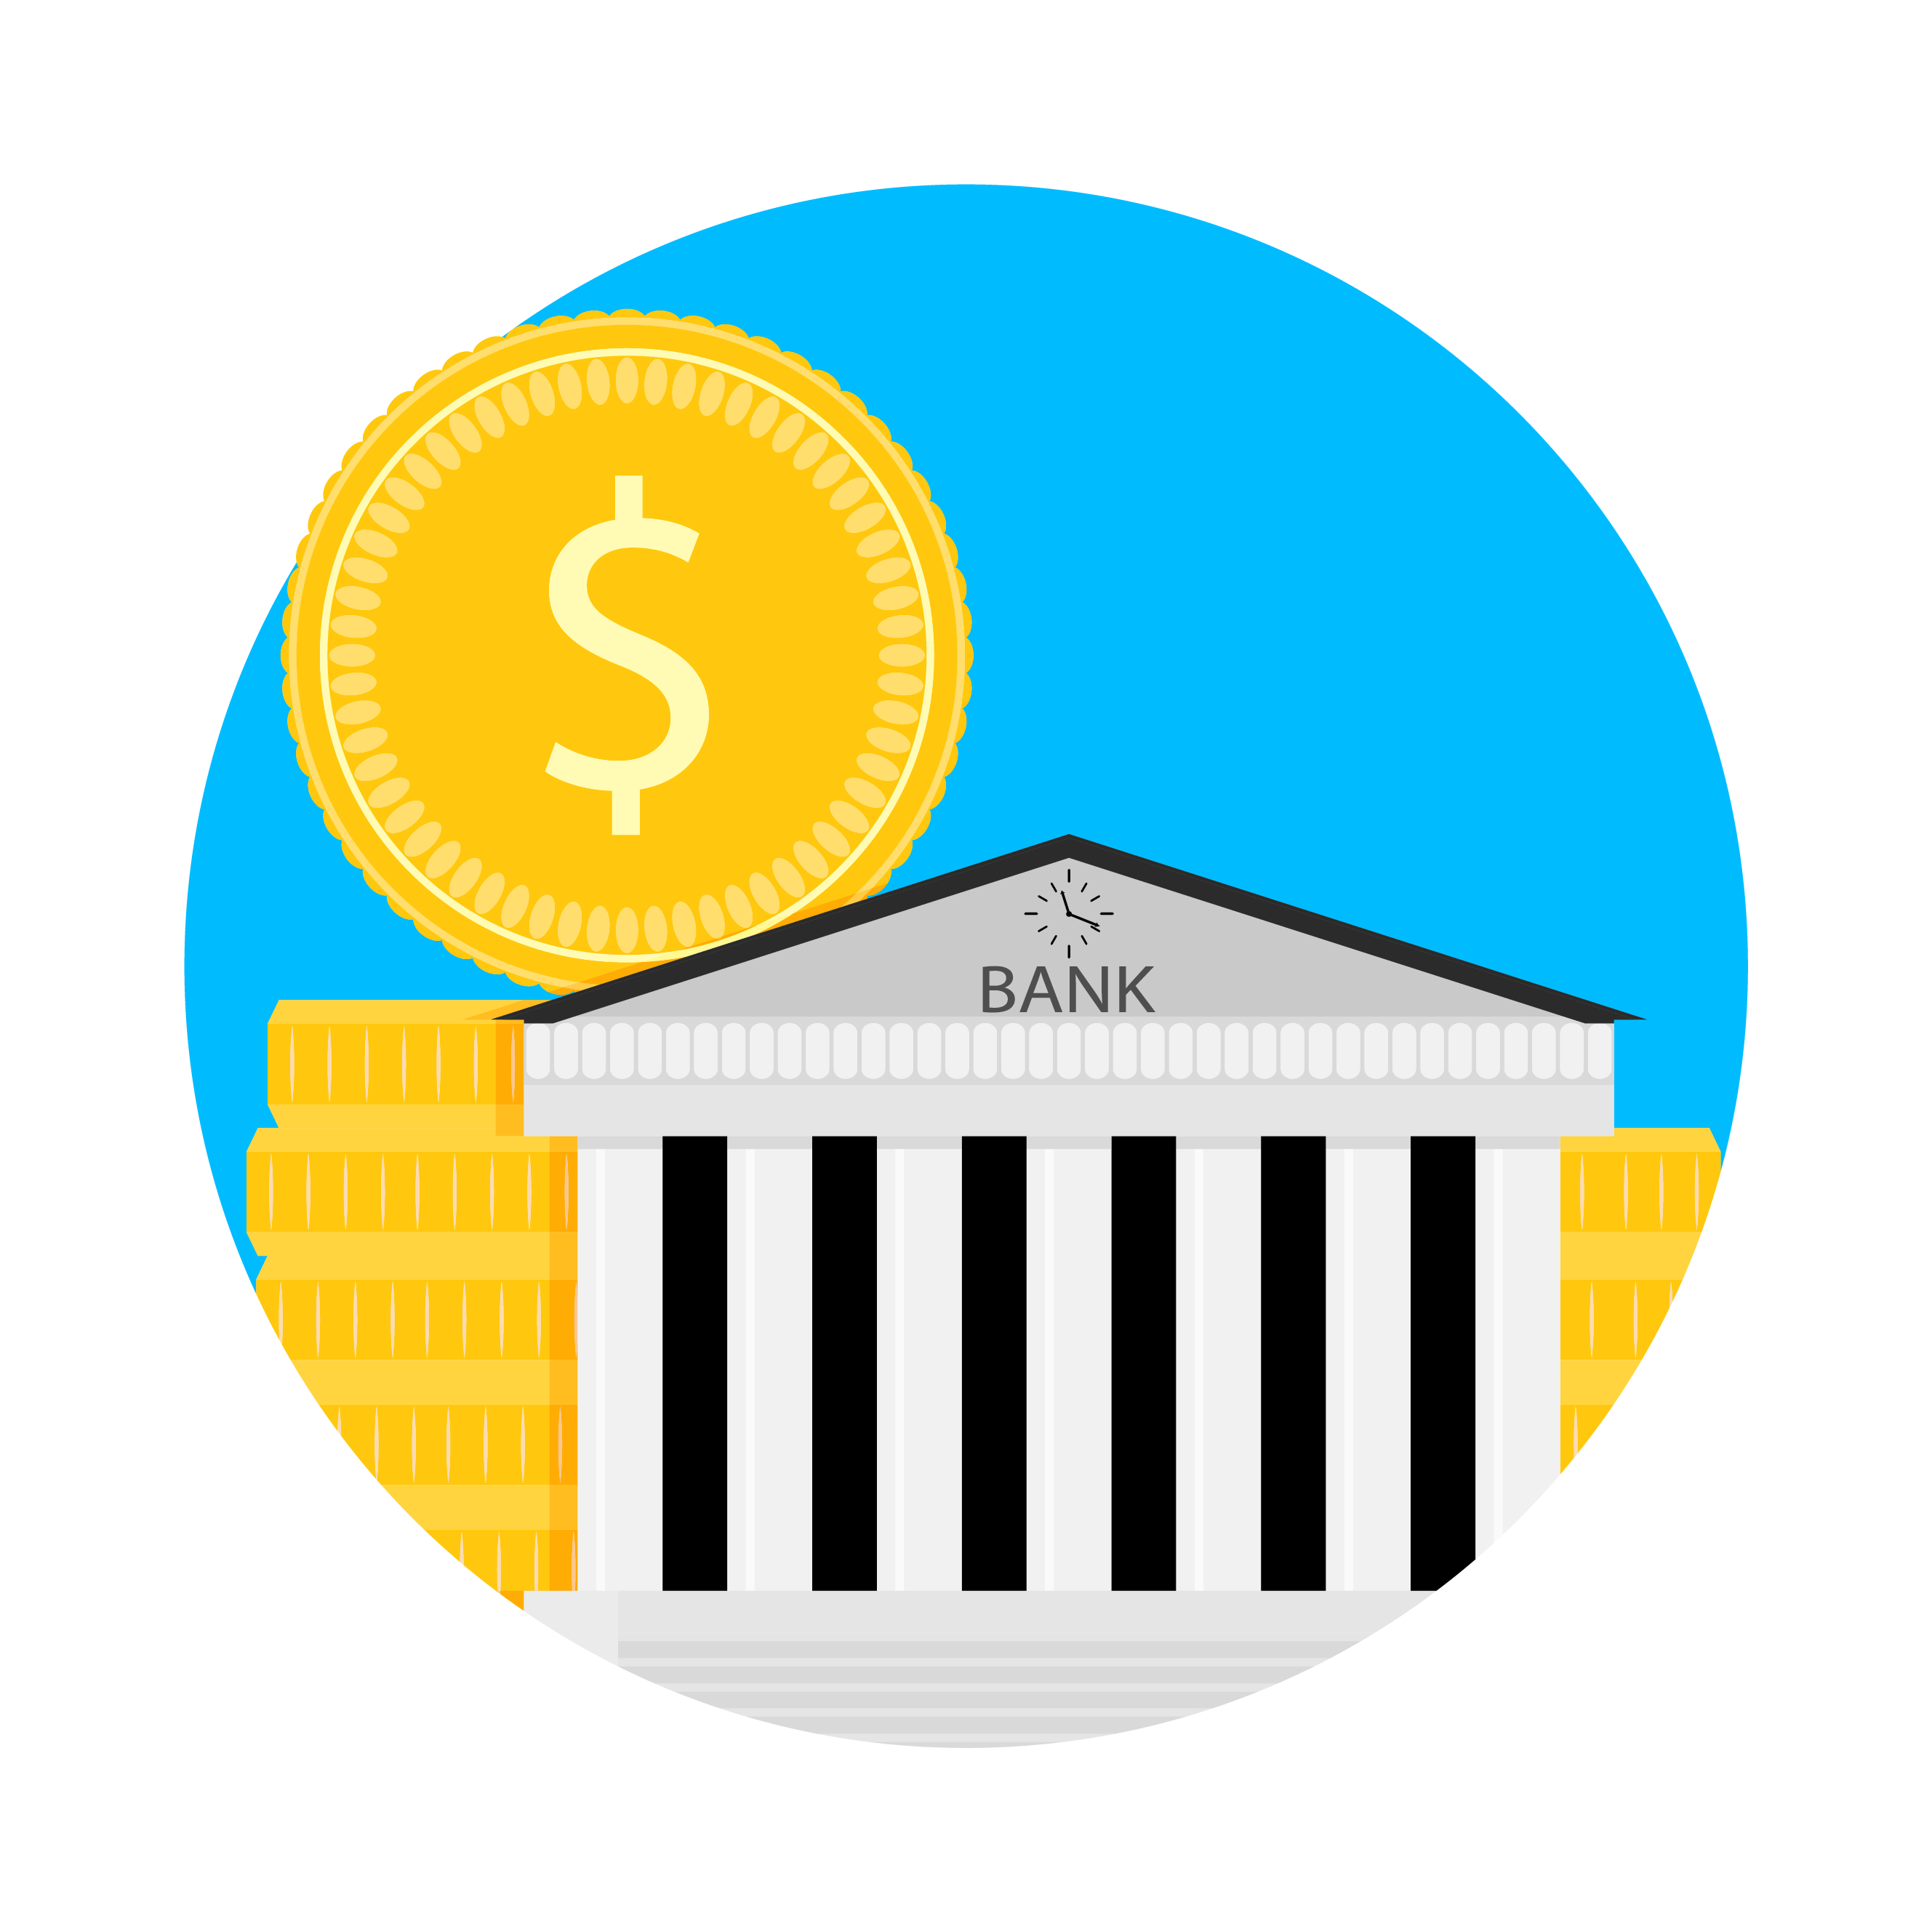 Bank Financial Capitalization Icon By 09910190 Thehungryjpeg Com